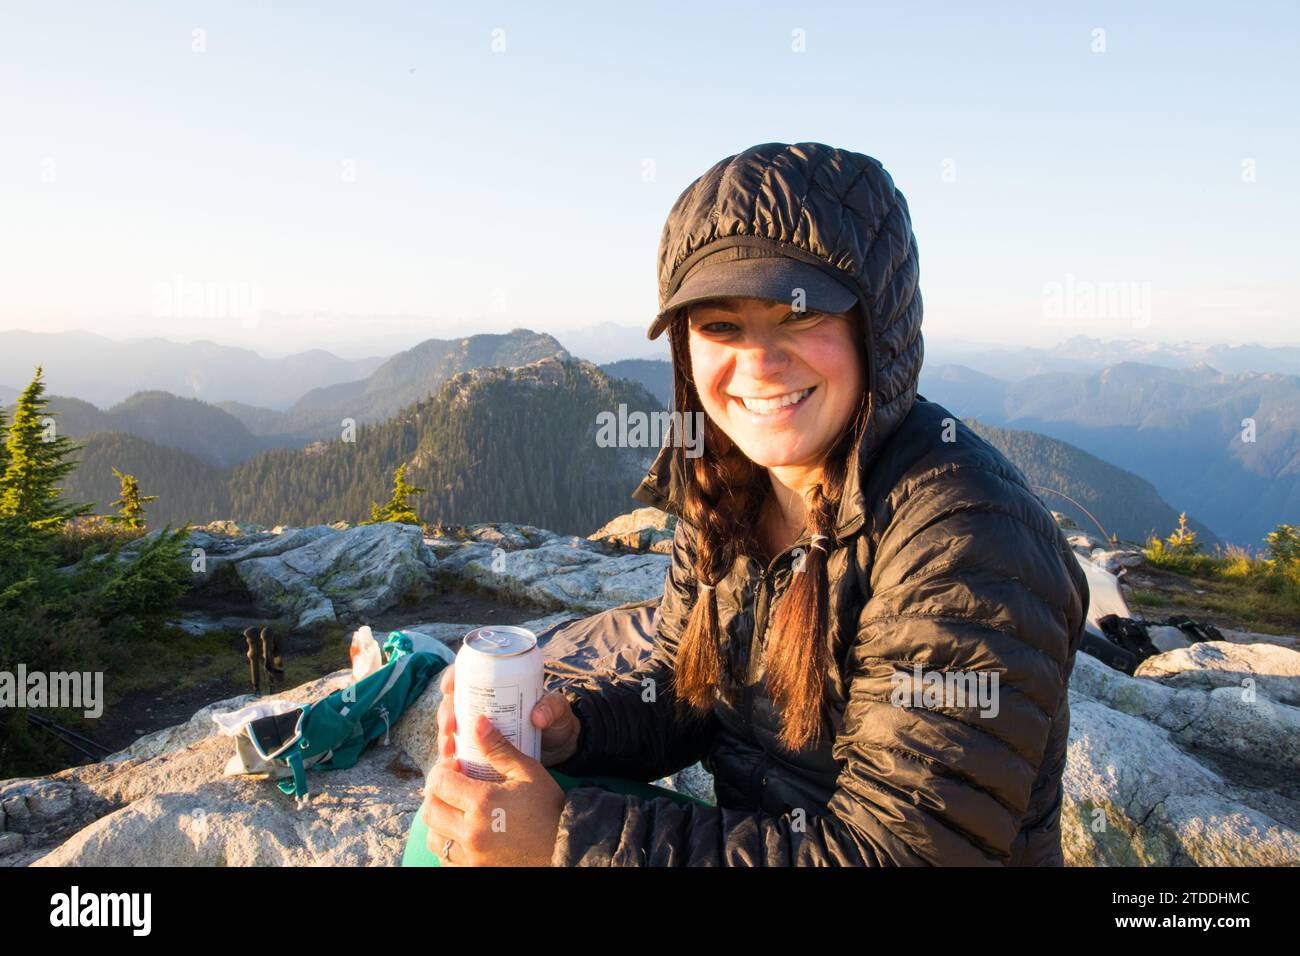 Fit woman smiling, holding drink on mountain summit Stock Photo